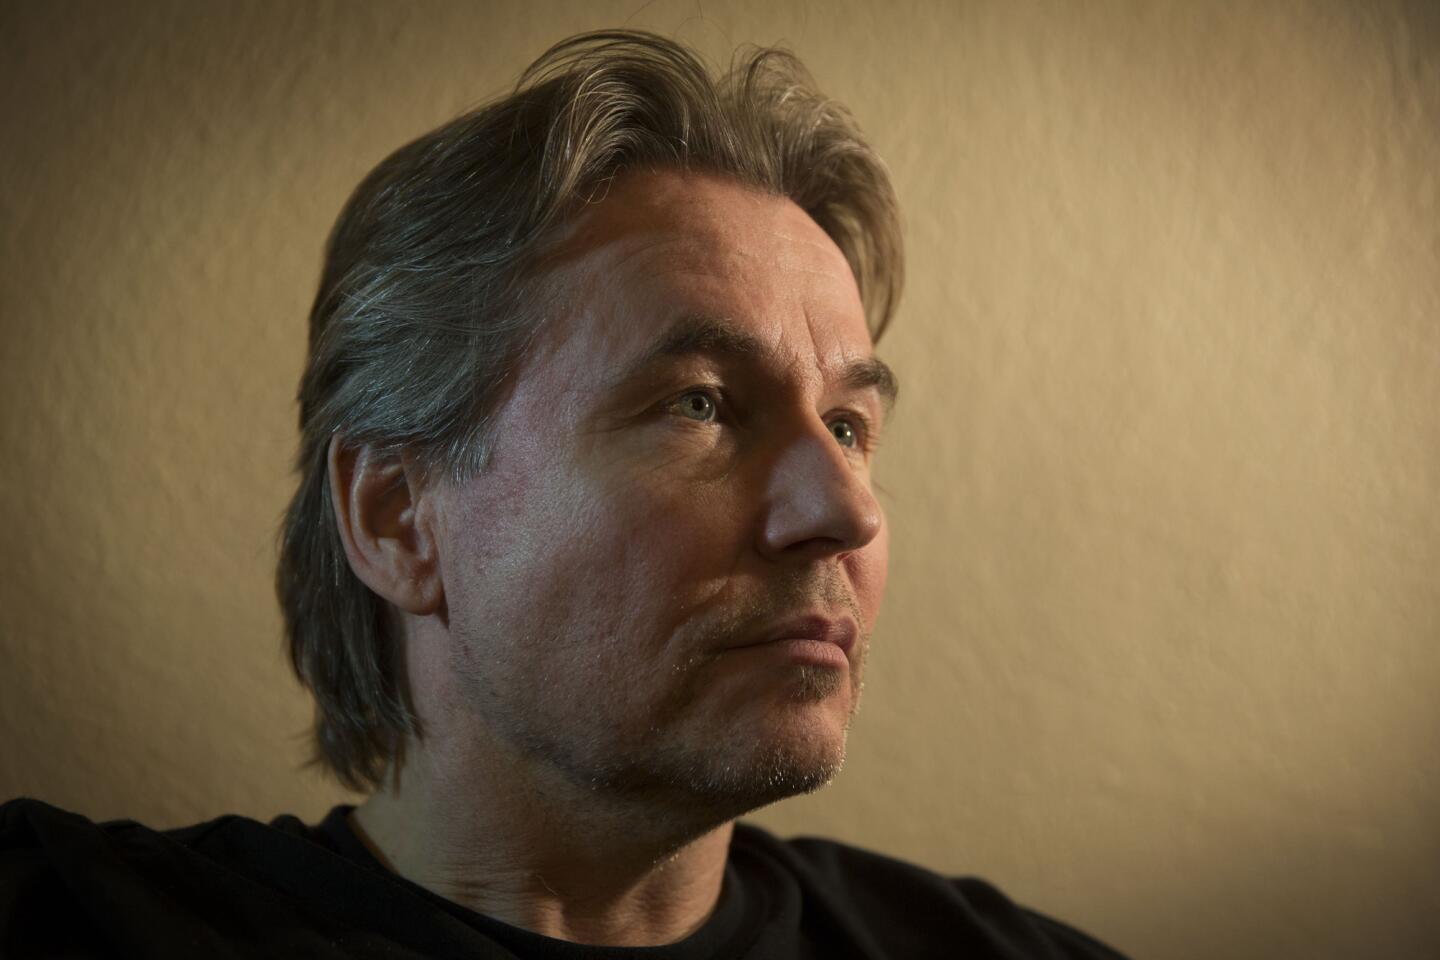 Arts and culture in pictures by The Times | Esa-Pekka Salonen returns to L.A. Phil